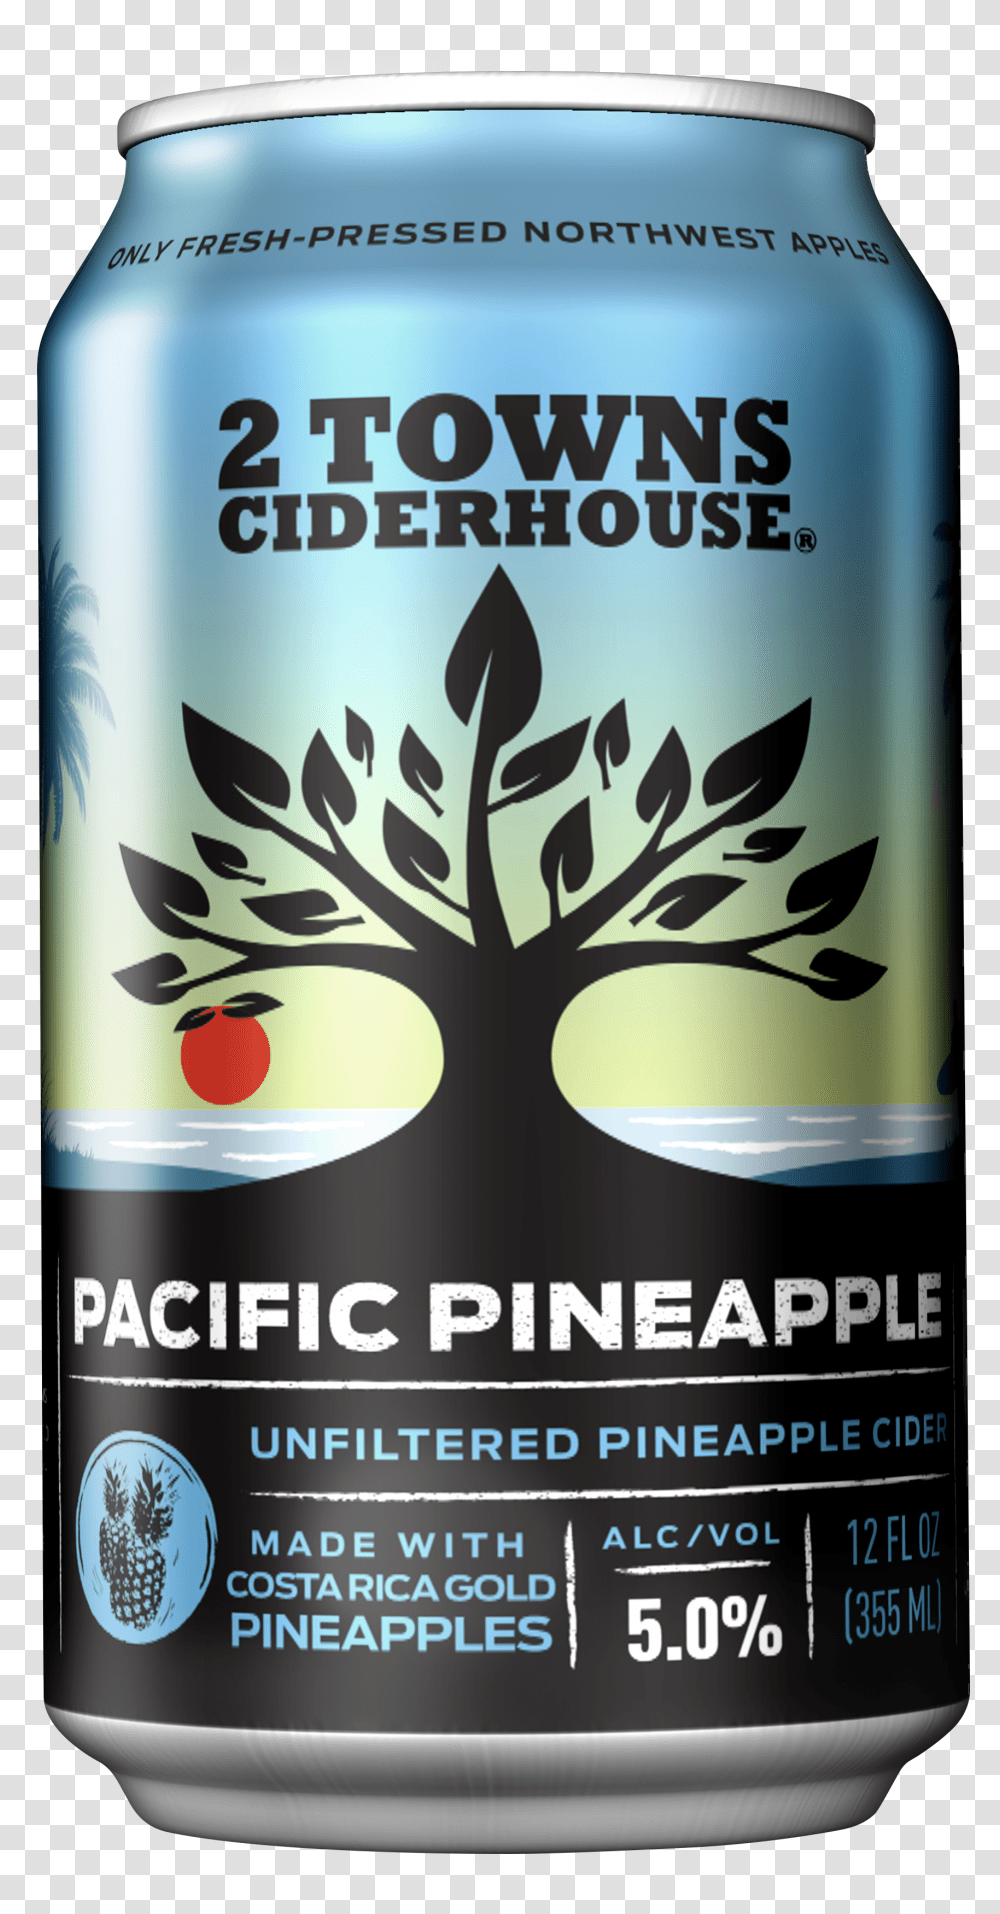 Towns Ciderhouse Makes Wave With Pacific Pineapple 2 Towns Pacific Pineapple Cider, Tin, Can, Beverage, Alcohol Transparent Png